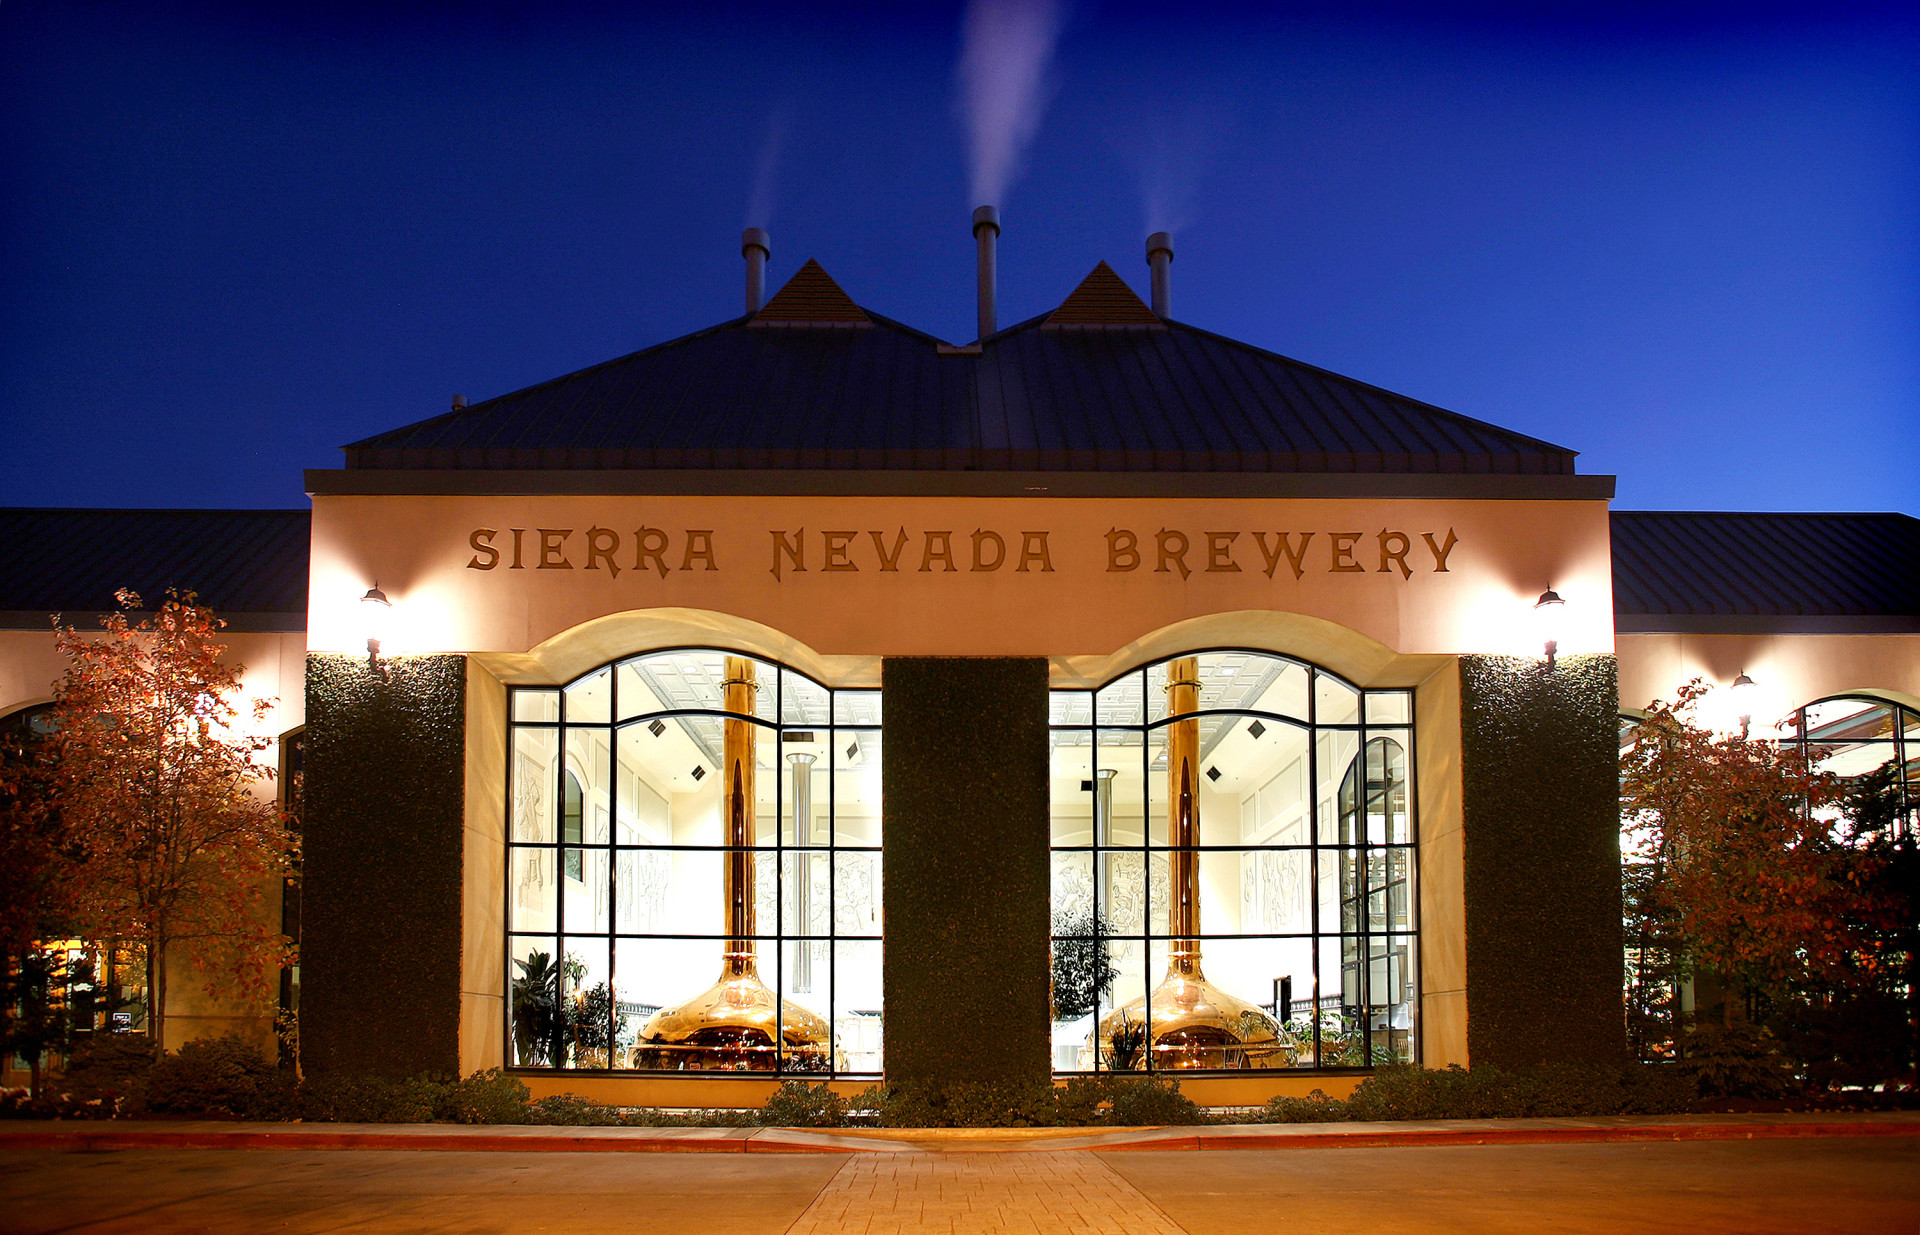 At its facility in Chico, Calif., Sierra Nevada Brewing Company has built a CO2 recovery system to capture the gas that's created during fermentation and recycle it back into operations.